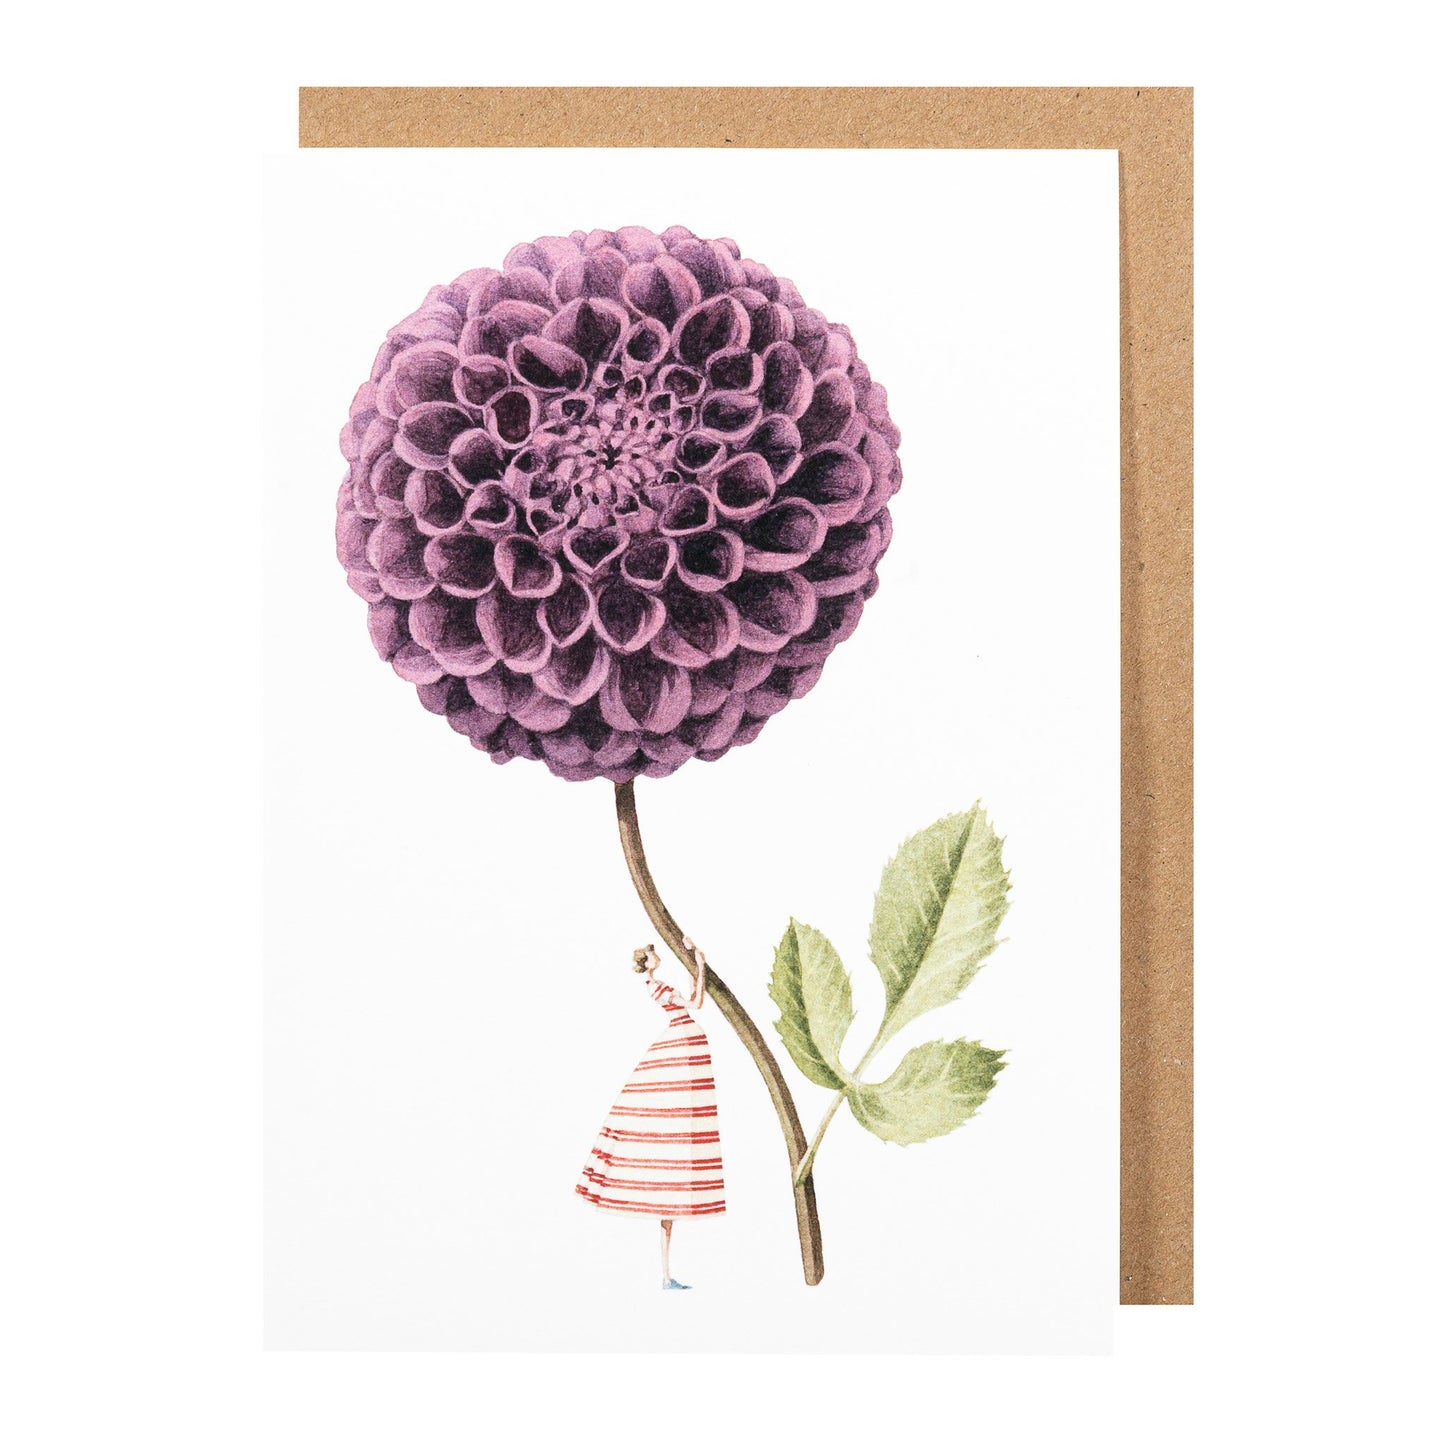 environmentally sustainable paper, compostable packaging, recycled paper, made in england, illustration, dahlia, purple dahlia